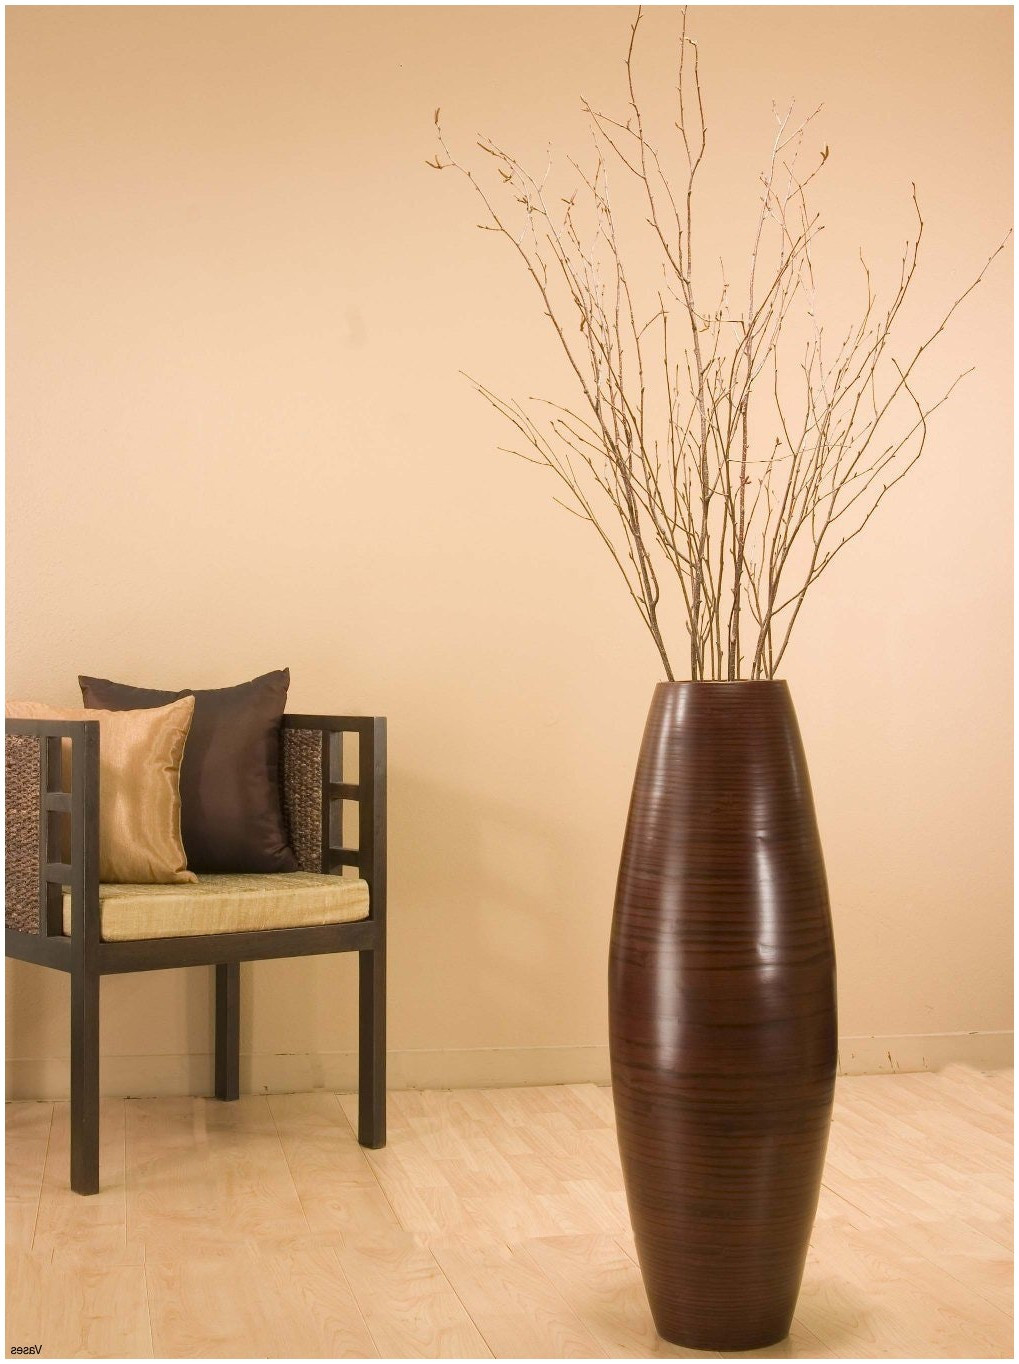 23 Fantastic Tall Rattan Floor Vase 2024 free download tall rattan floor vase of 21 beau decorative vases anciendemutu org with 712x0qv9hql sl1364 h vases tall green floor decorative standing with branchesi 0d